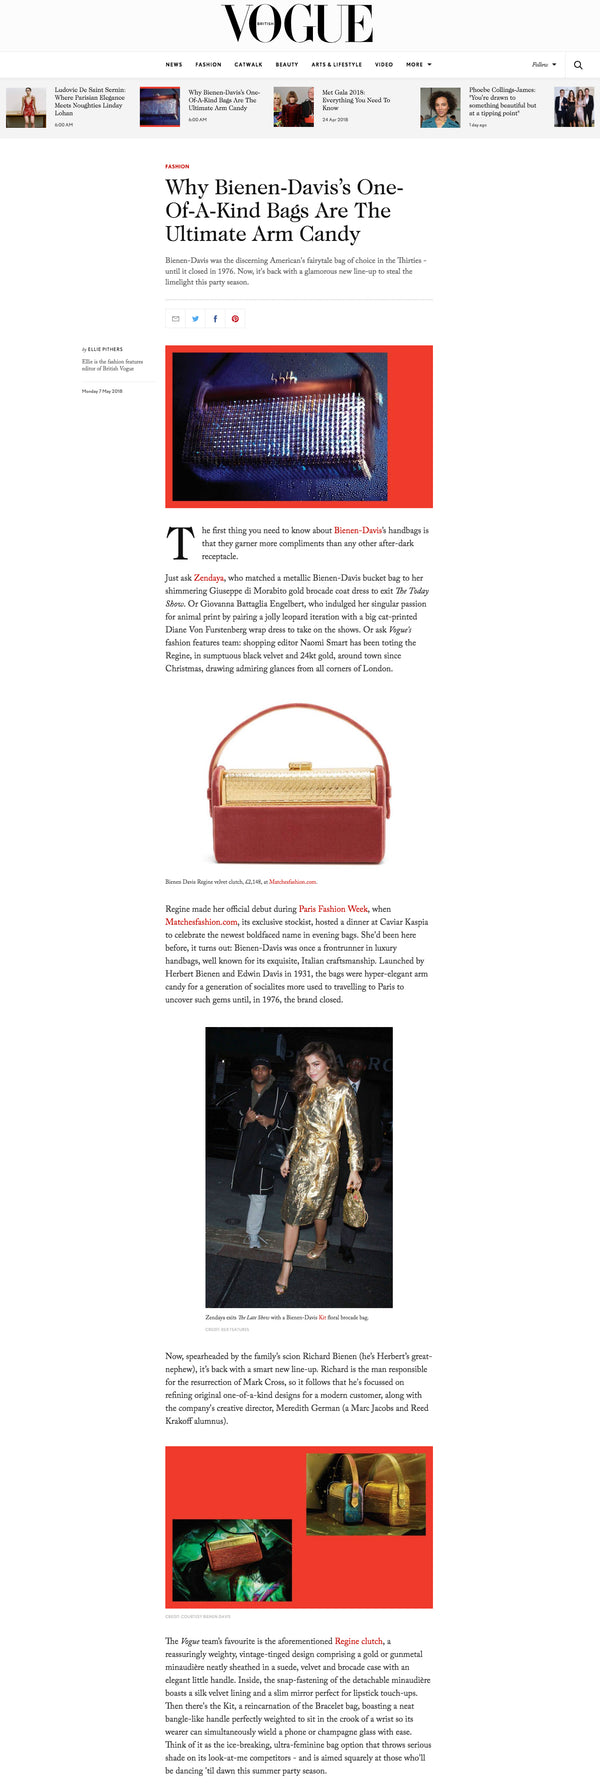 British_Vogue_Why_Bienen-Davis_One-Of-A-Kind Bags_Are_The_Ultimate_Arm_Candy